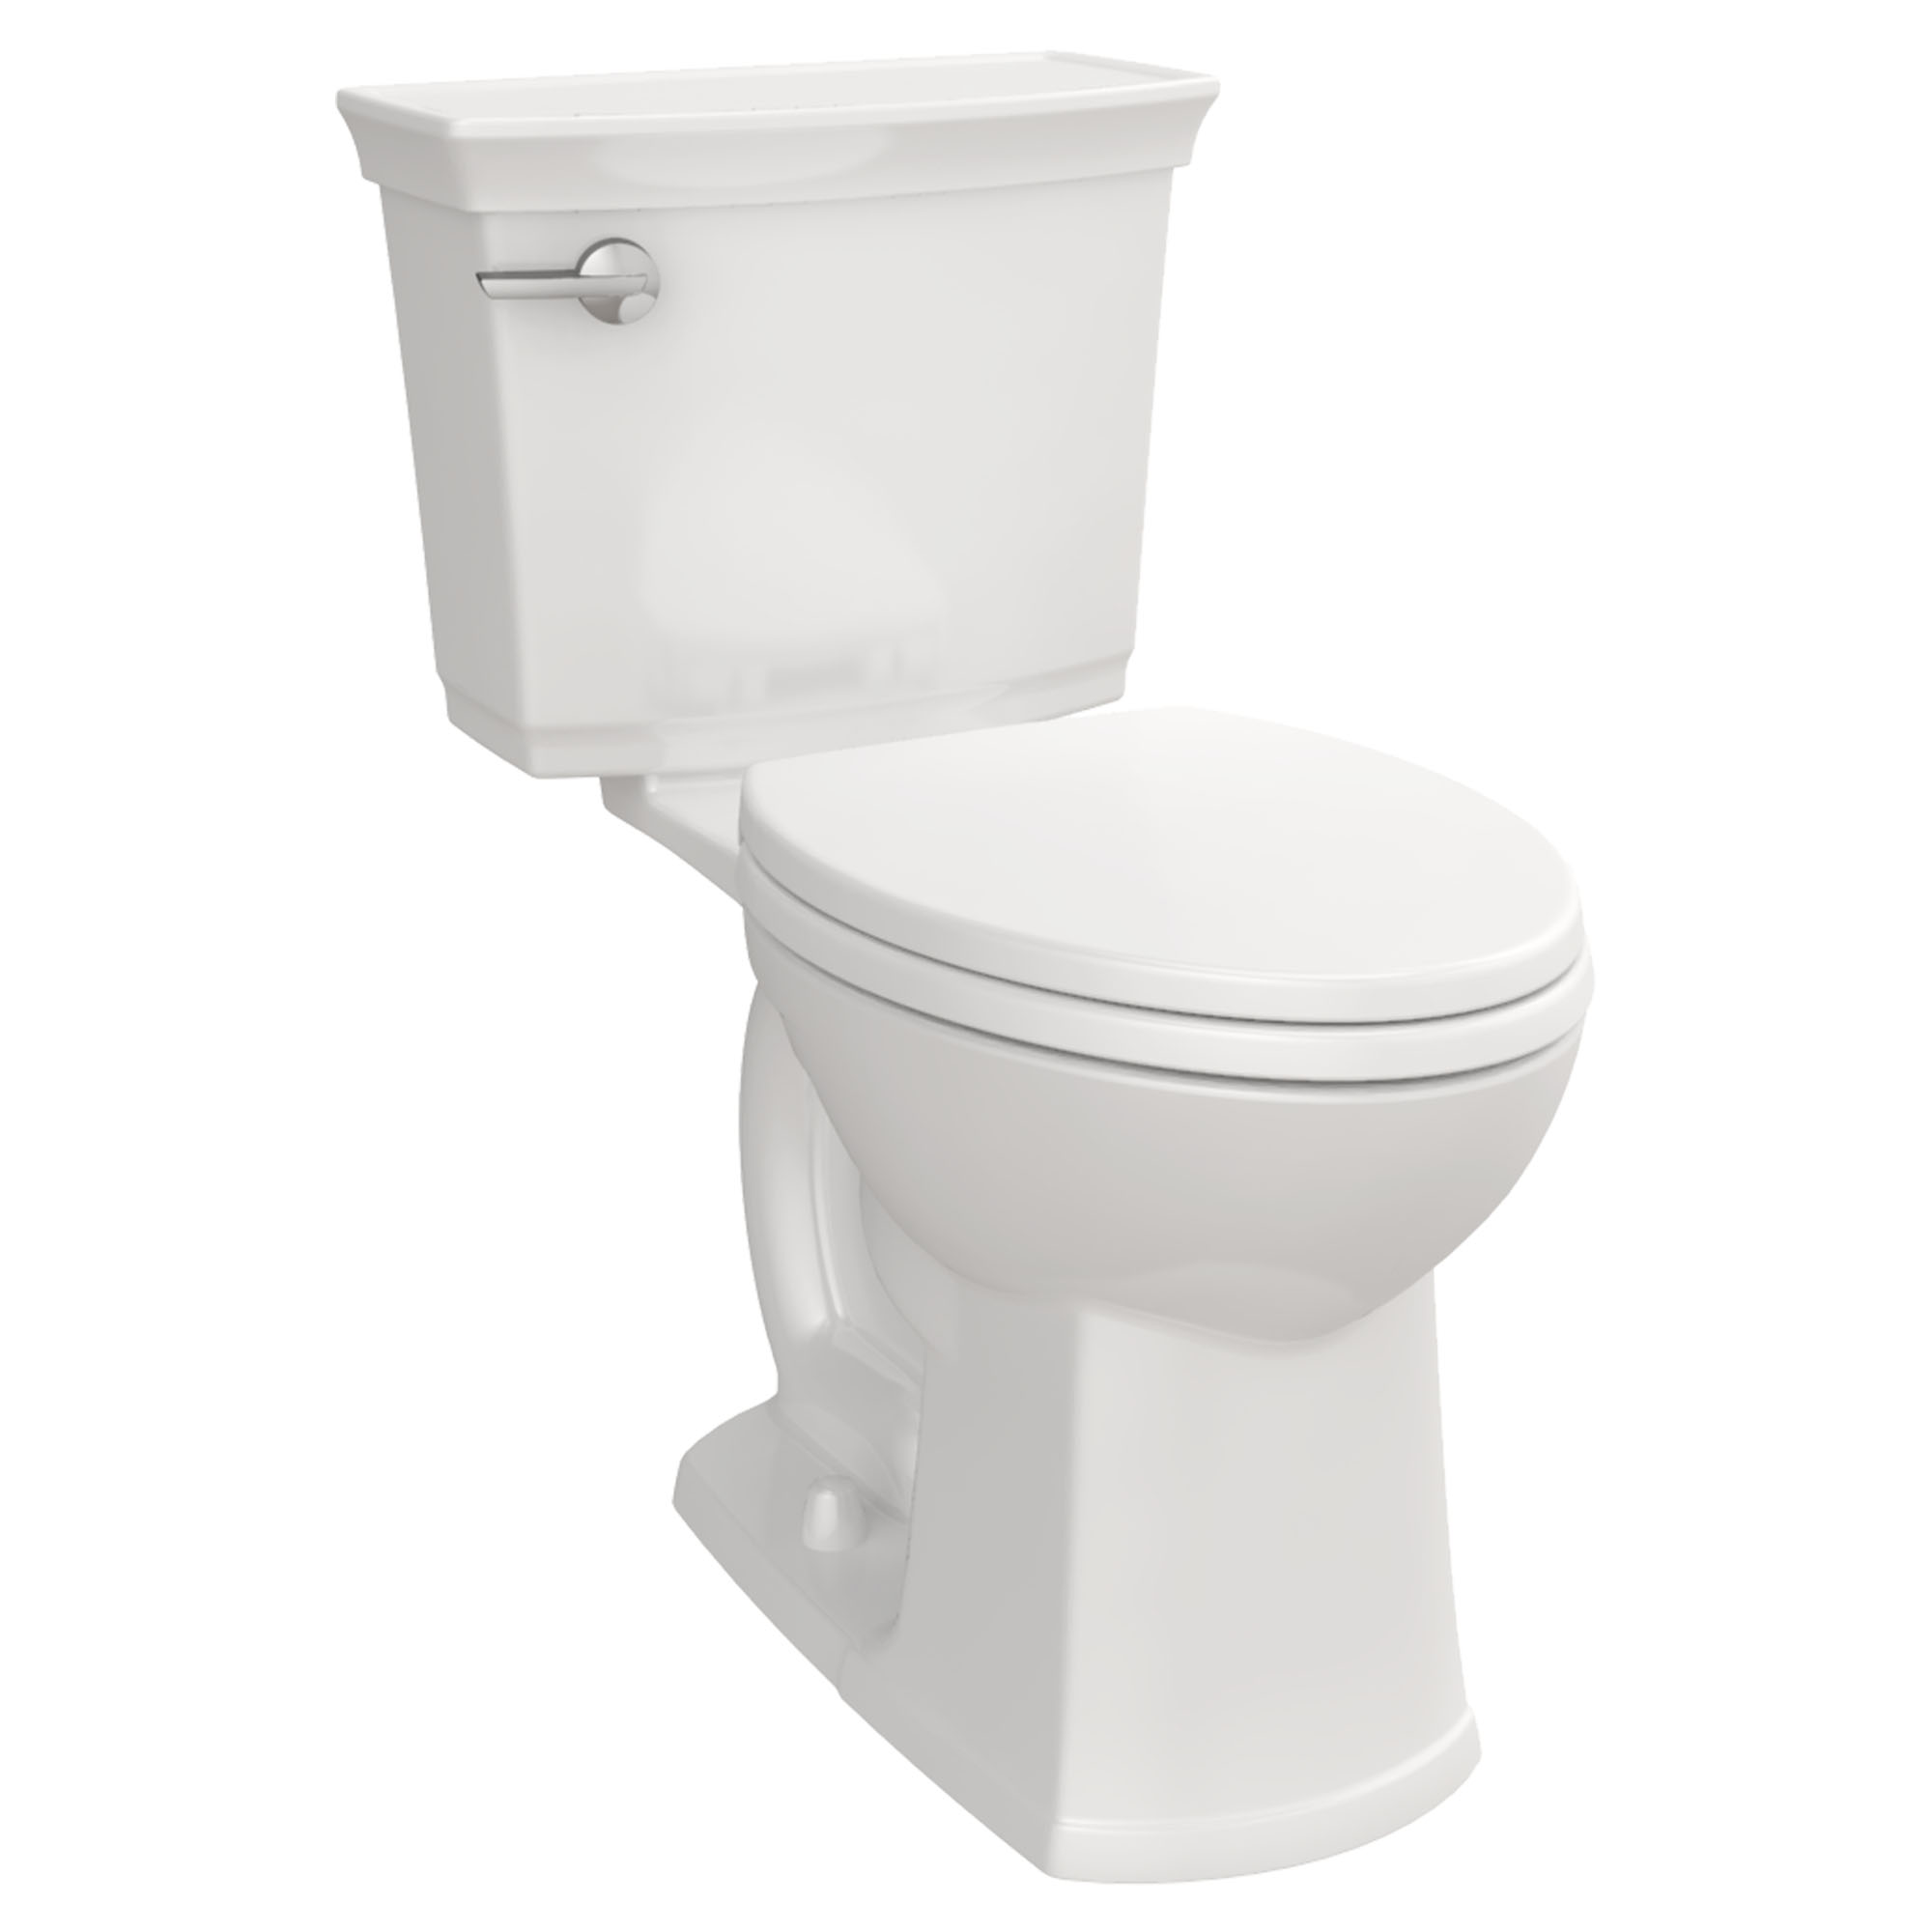 Wyatt® Two-Piece Chair Height Elongated Toilet with Seat